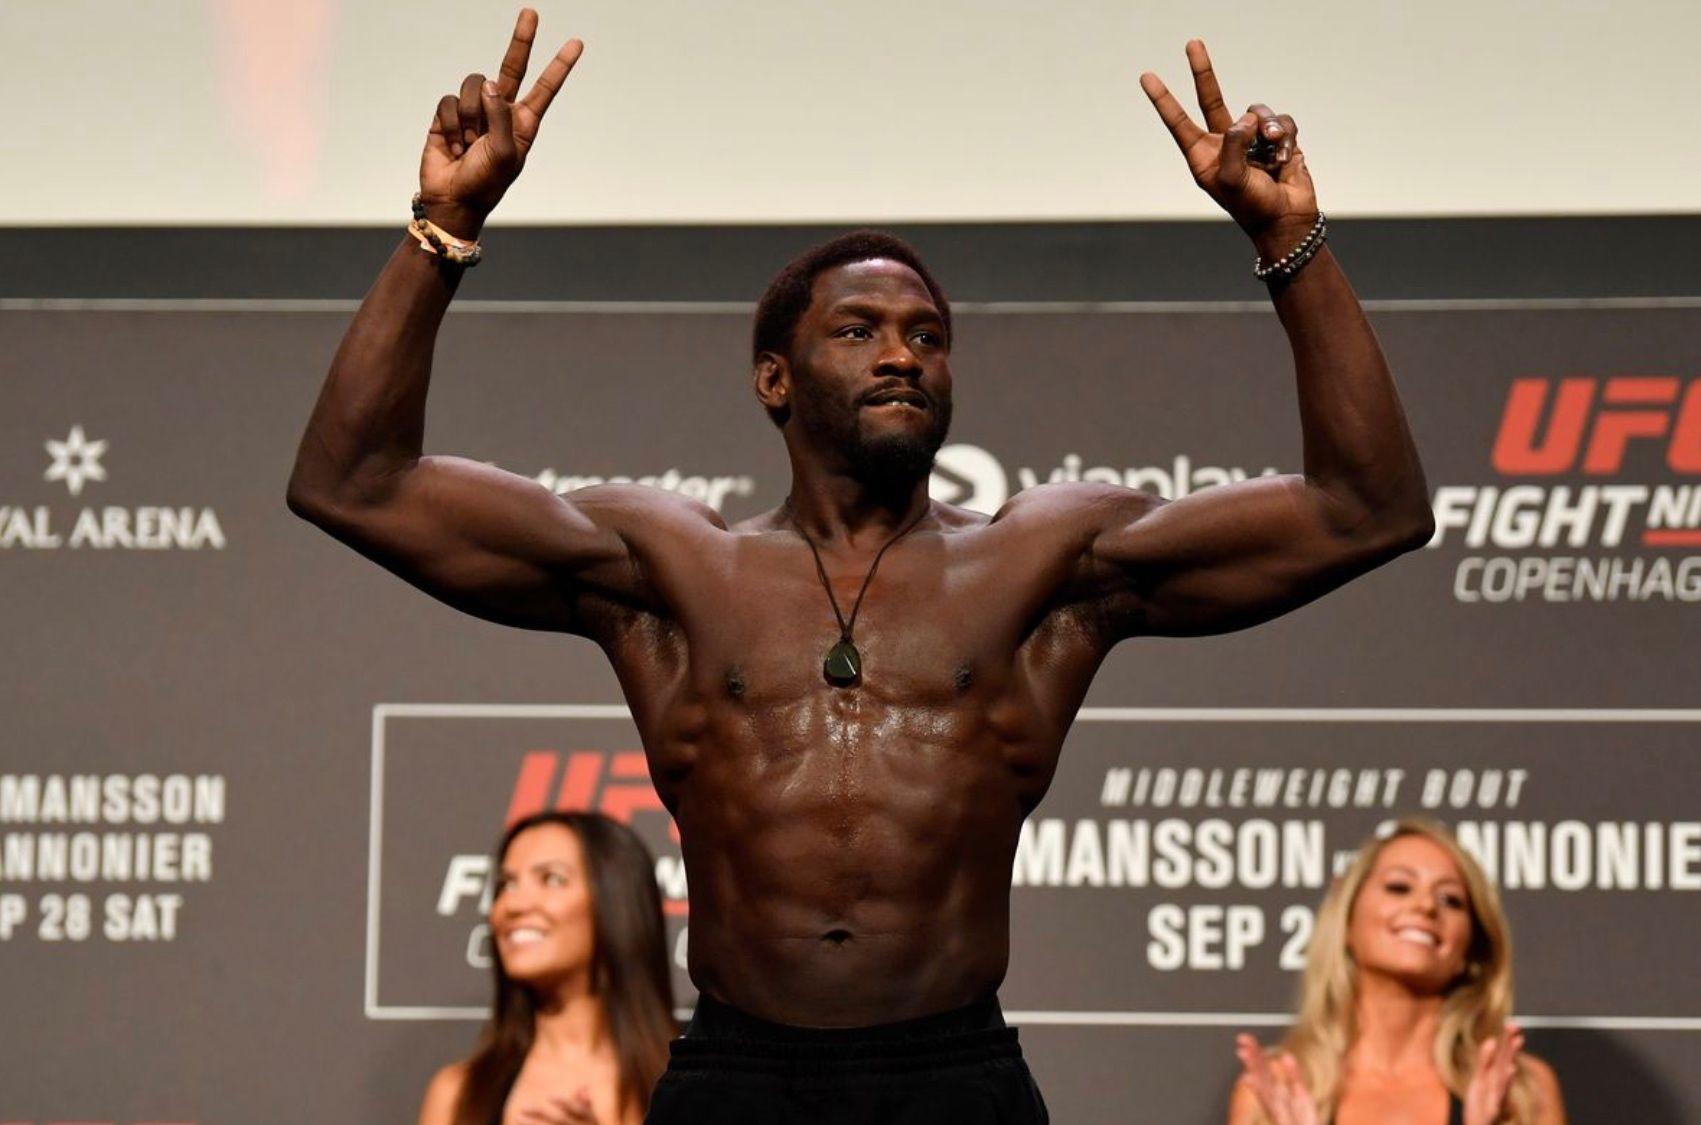 Jared Cannonier vs. Sean Strickland Targeted For October 15th